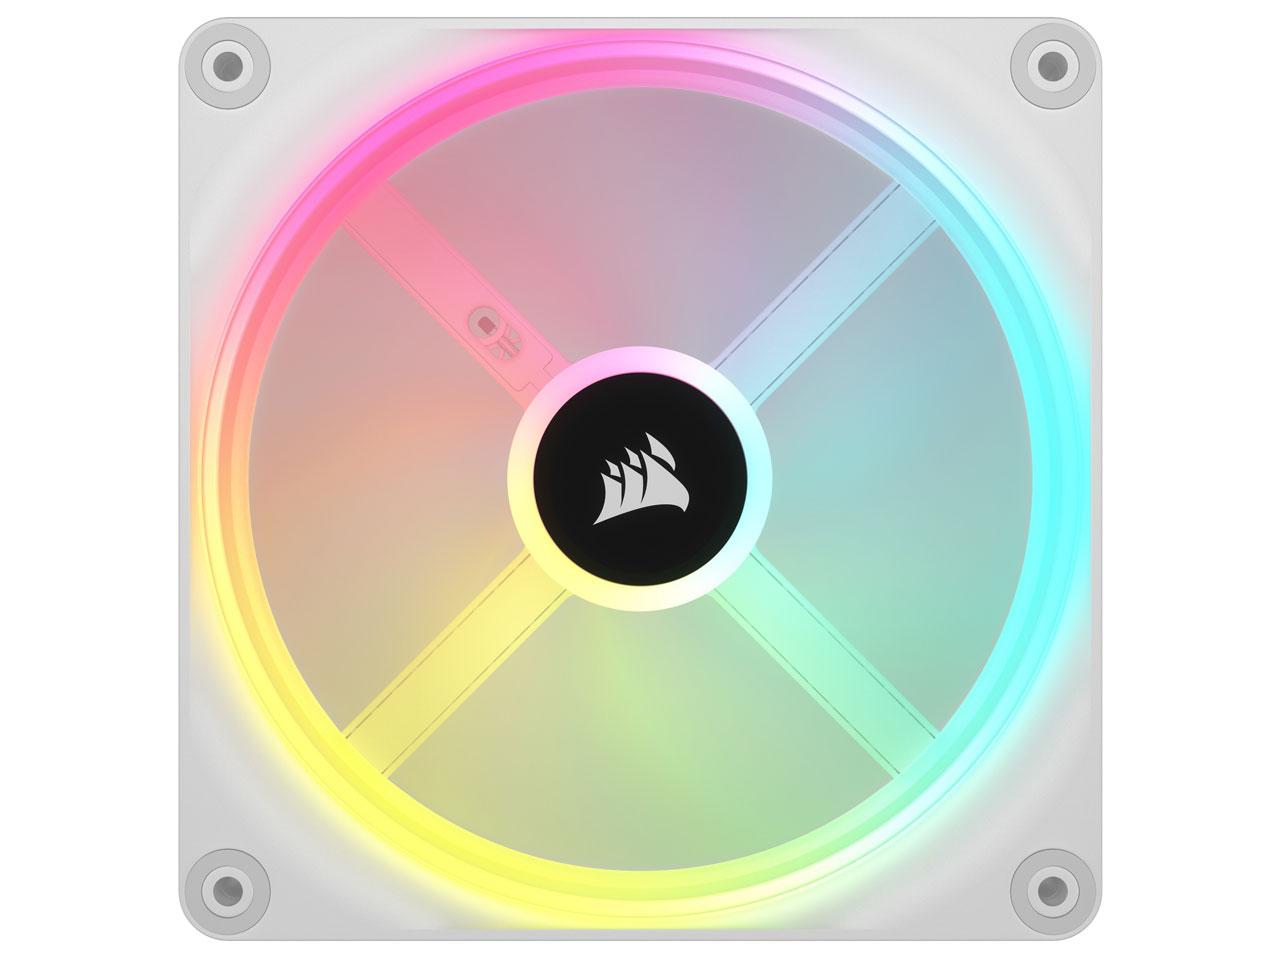 iCUE LINK QX140 RGB WHITE, 140mm Magnetic Dome RGB Fan, Expansion Kit   (CO-9051007-WW)